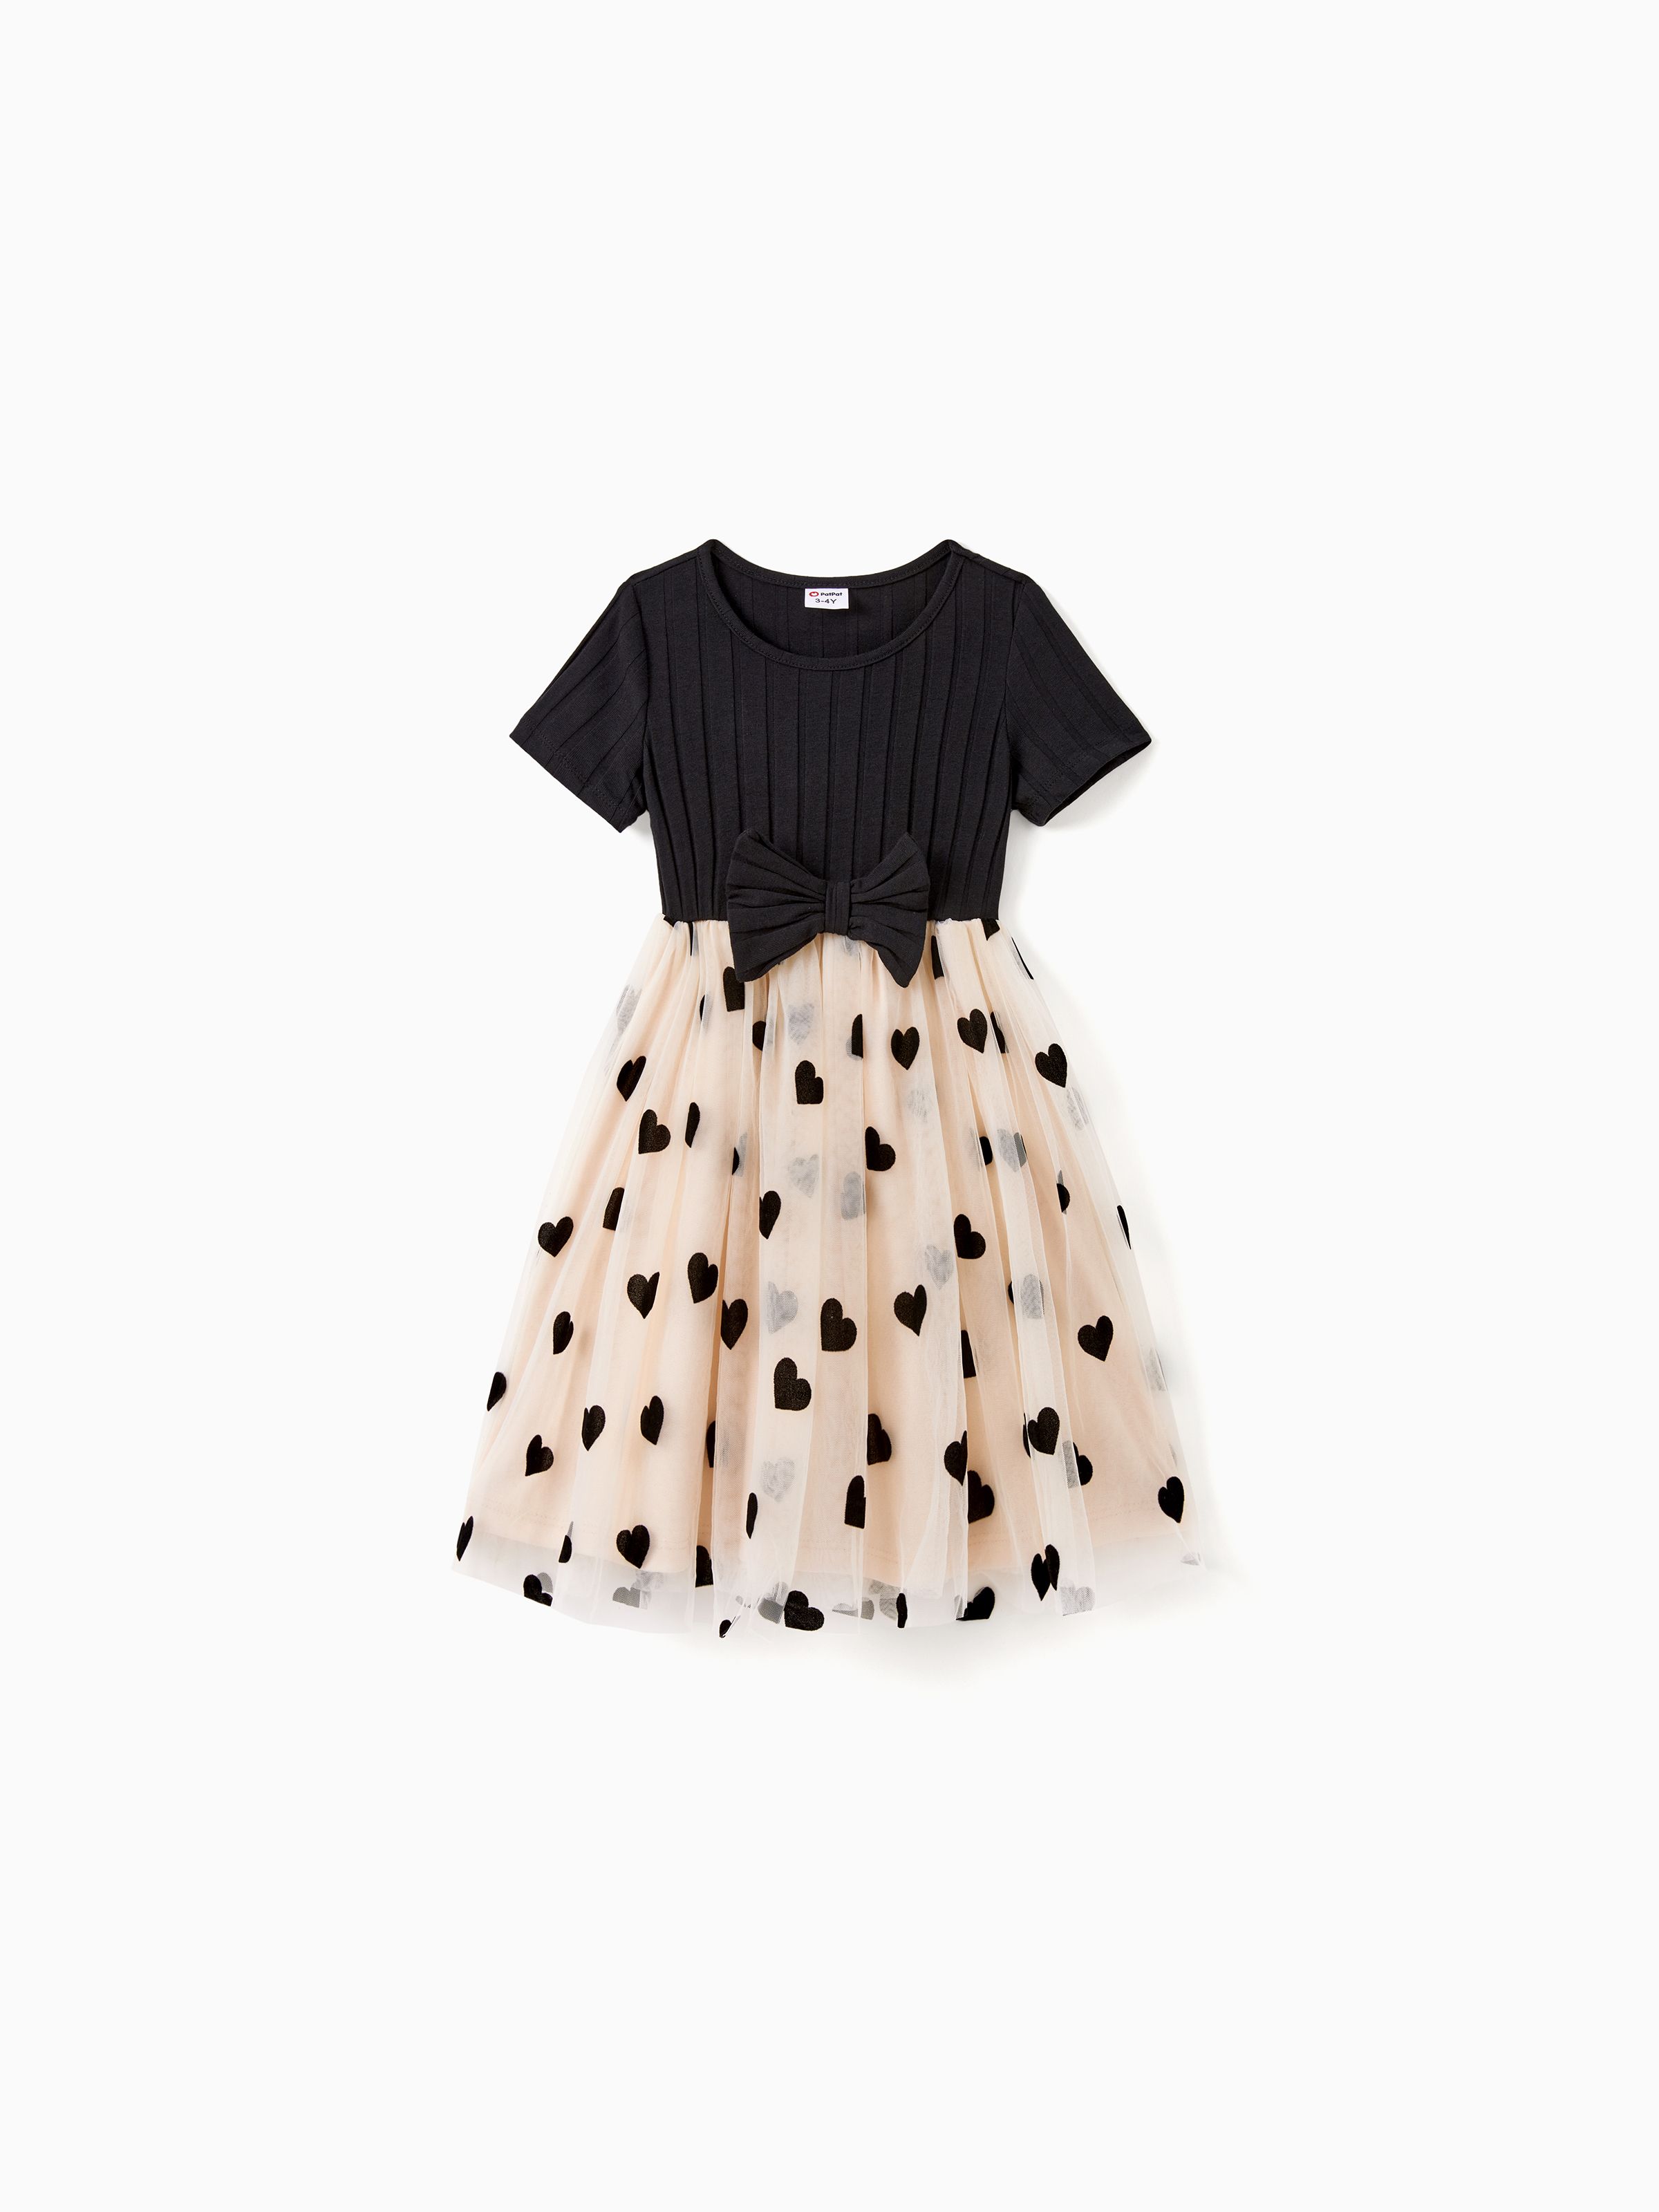 

Mommy and Me Black Top Spliced Heart Pattern Mesh Dresses